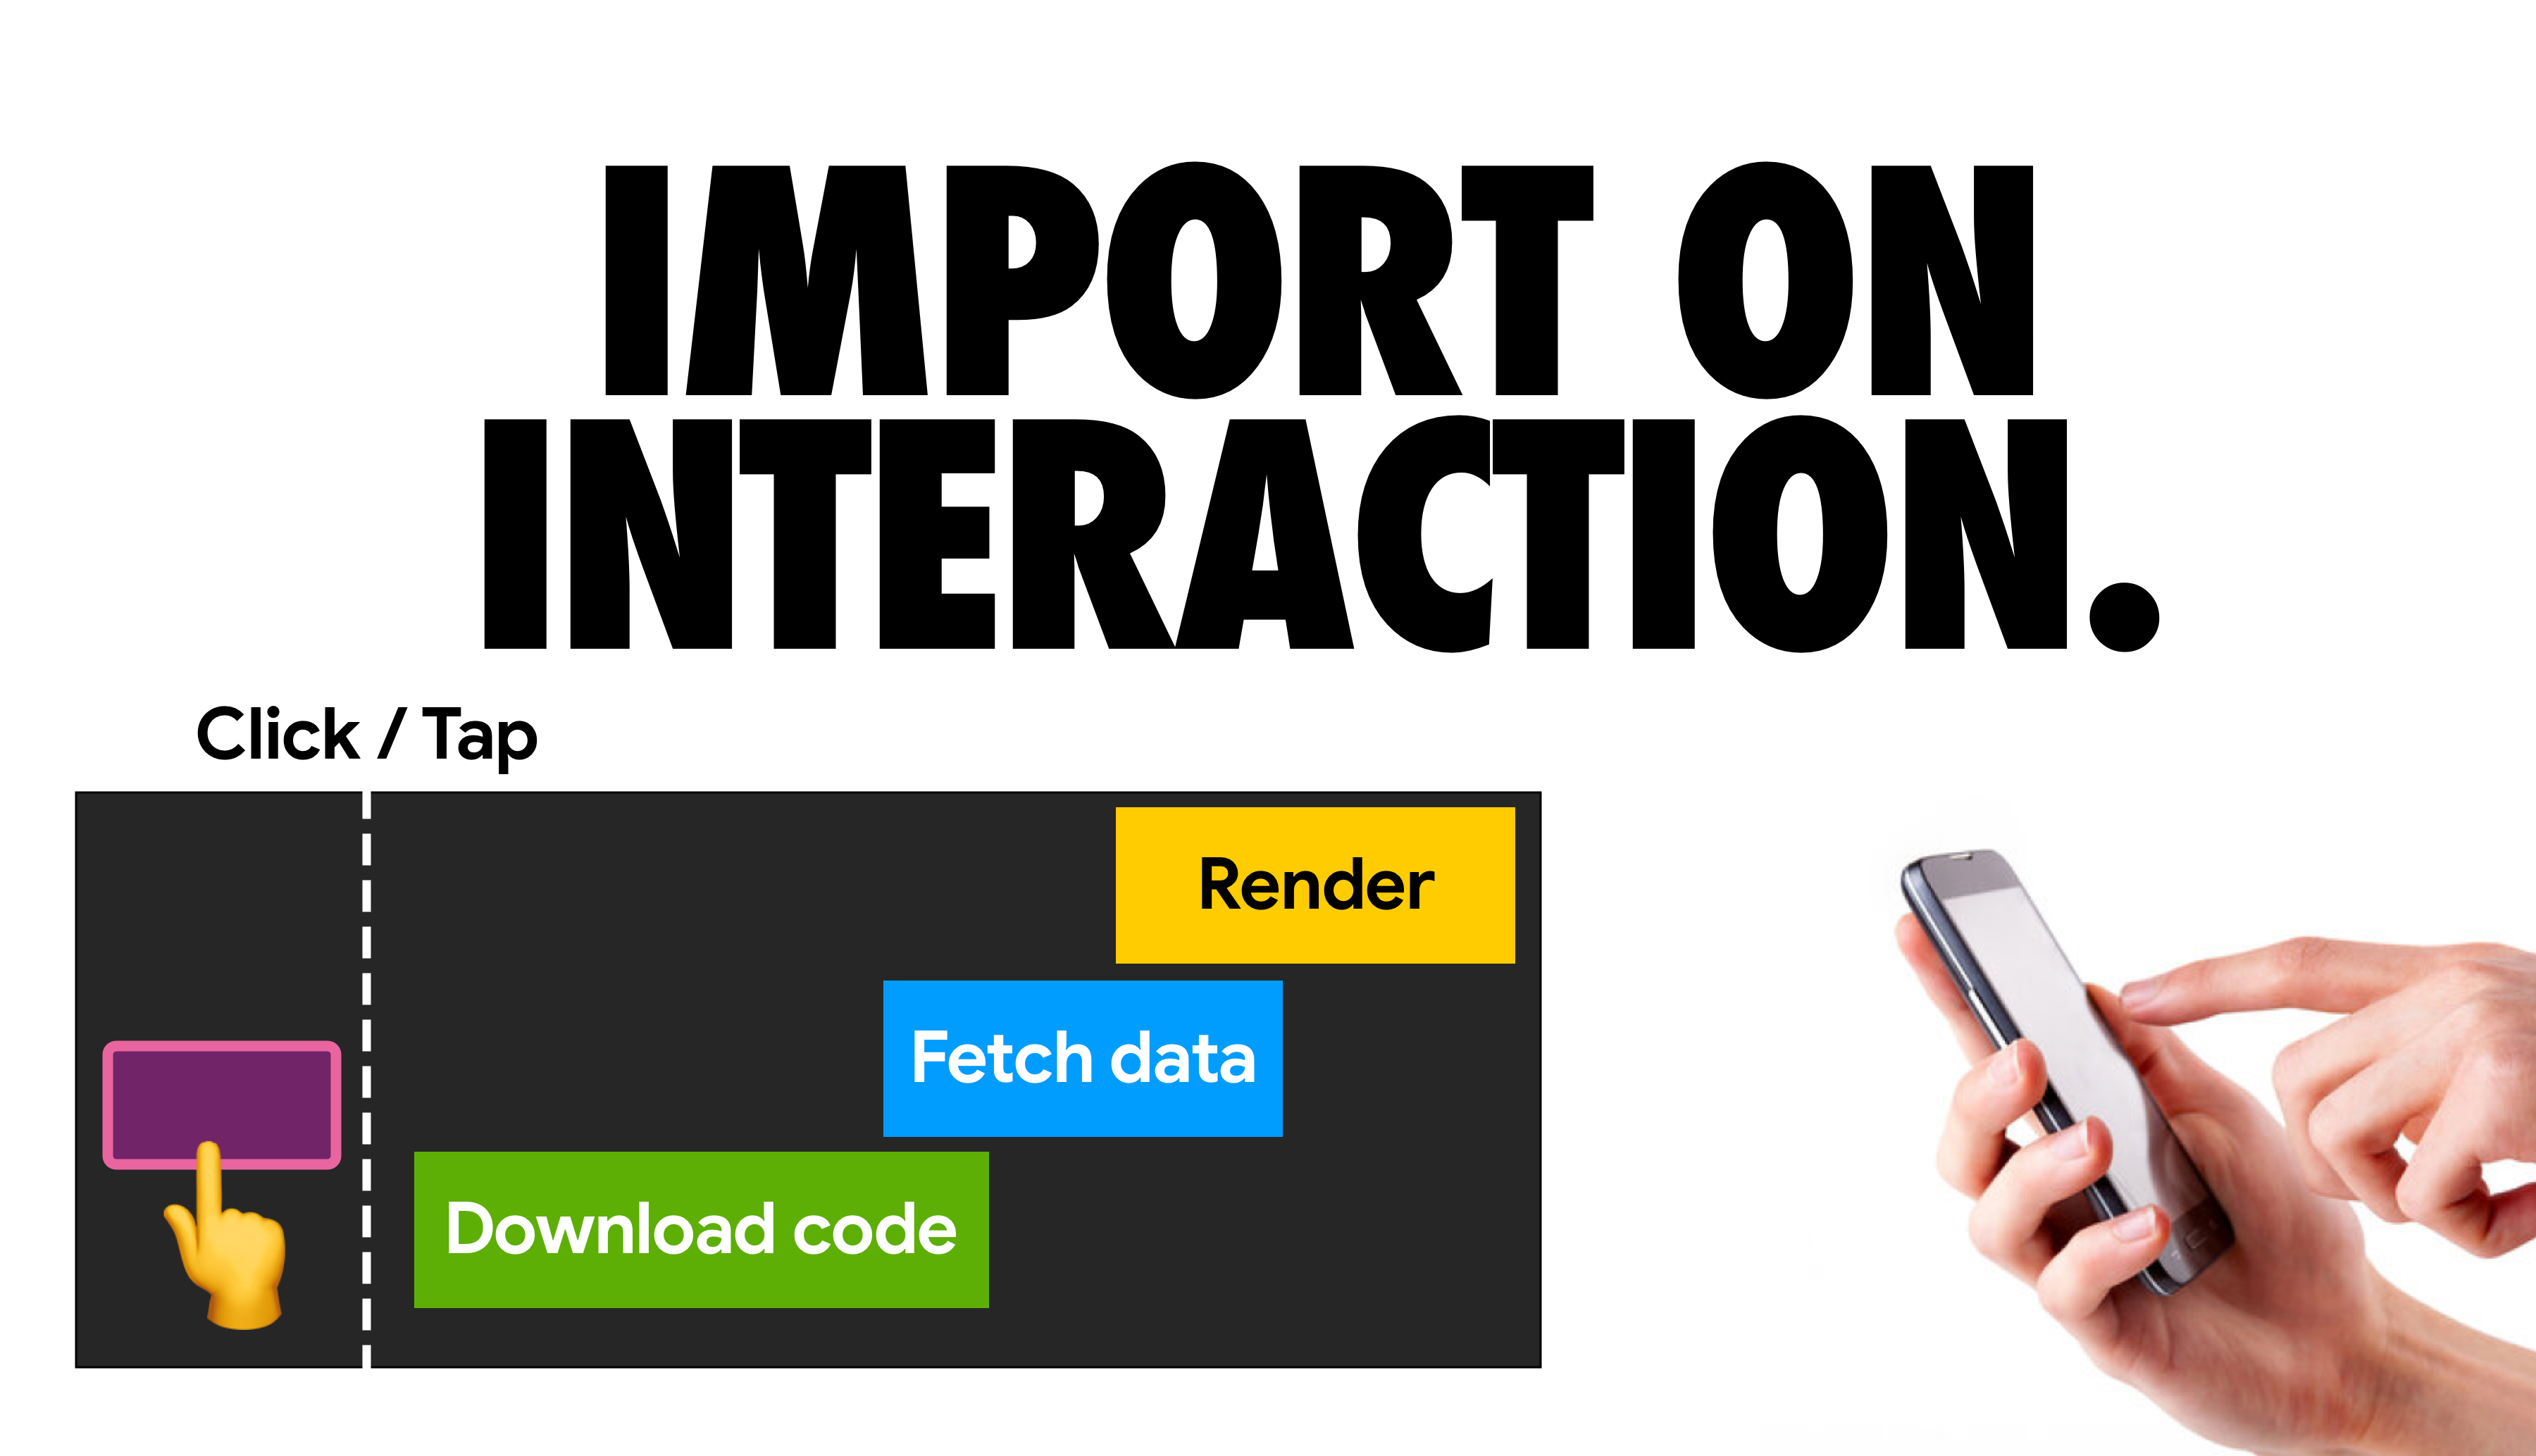 Import on interaction poster 3x